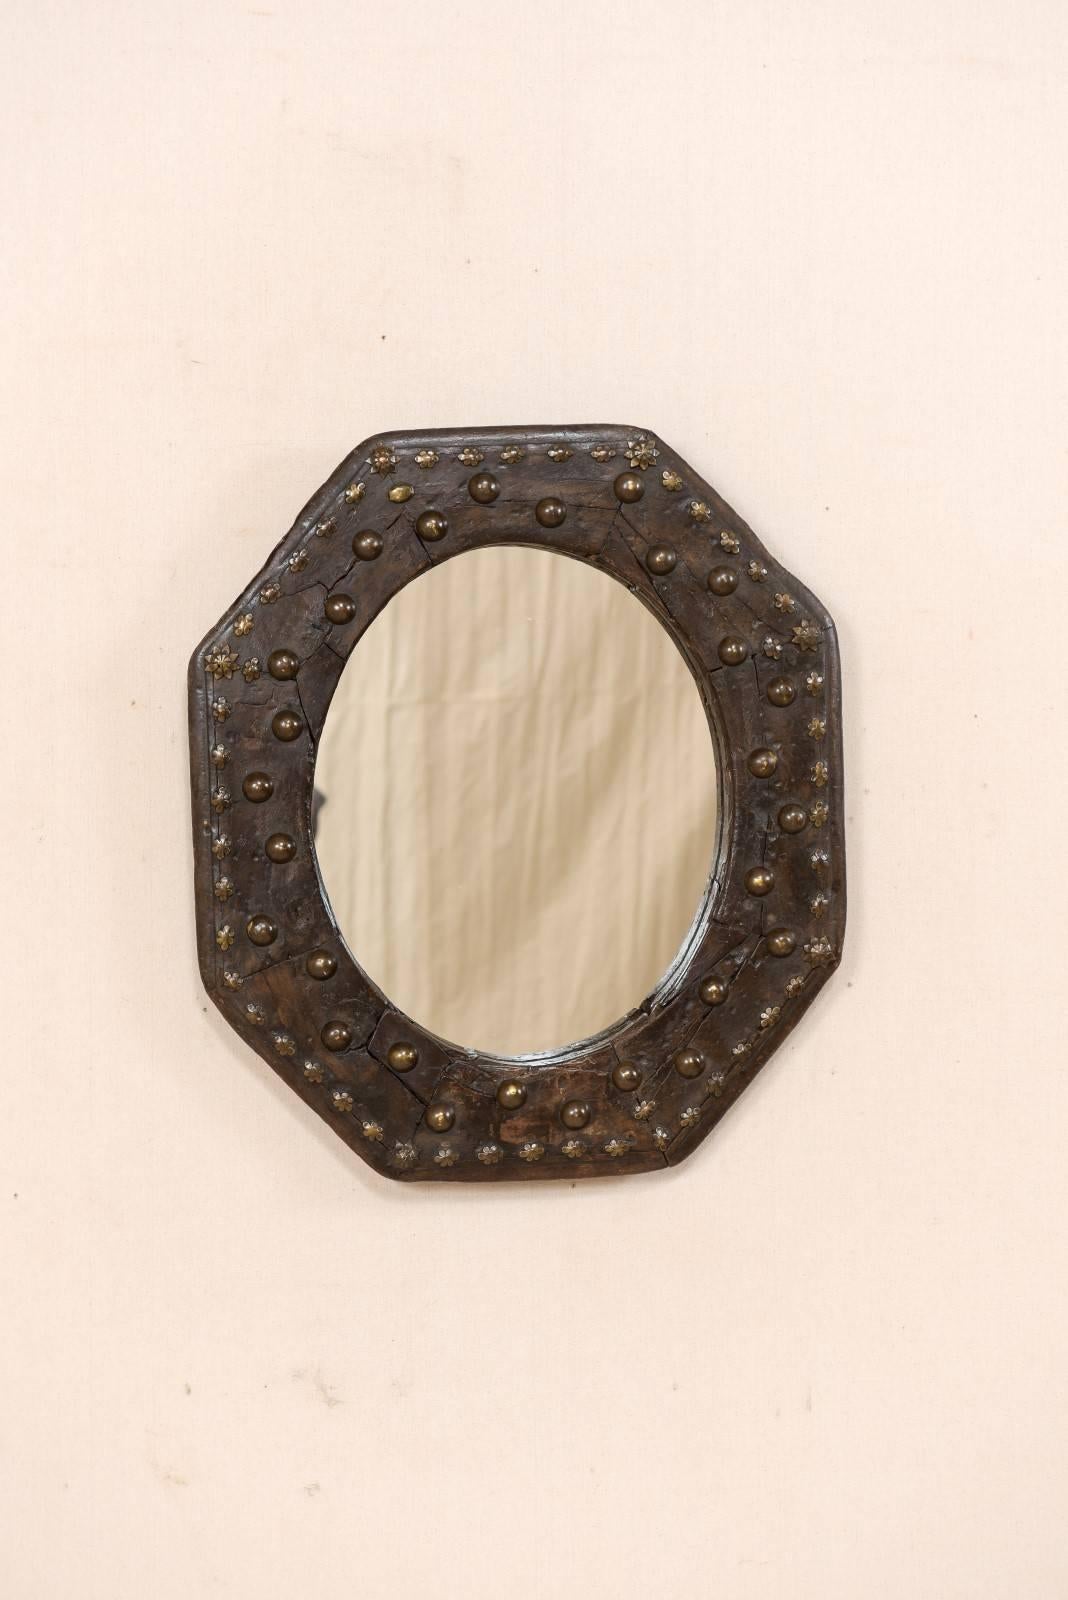 A Spanish 19th century octagonal wooden mirror. This handsome antique mirror from Spain features an octagon shaped wood surround, adorn with undulating round metal accents and smaller metal flowers about it's boarder edges. The brass accents are